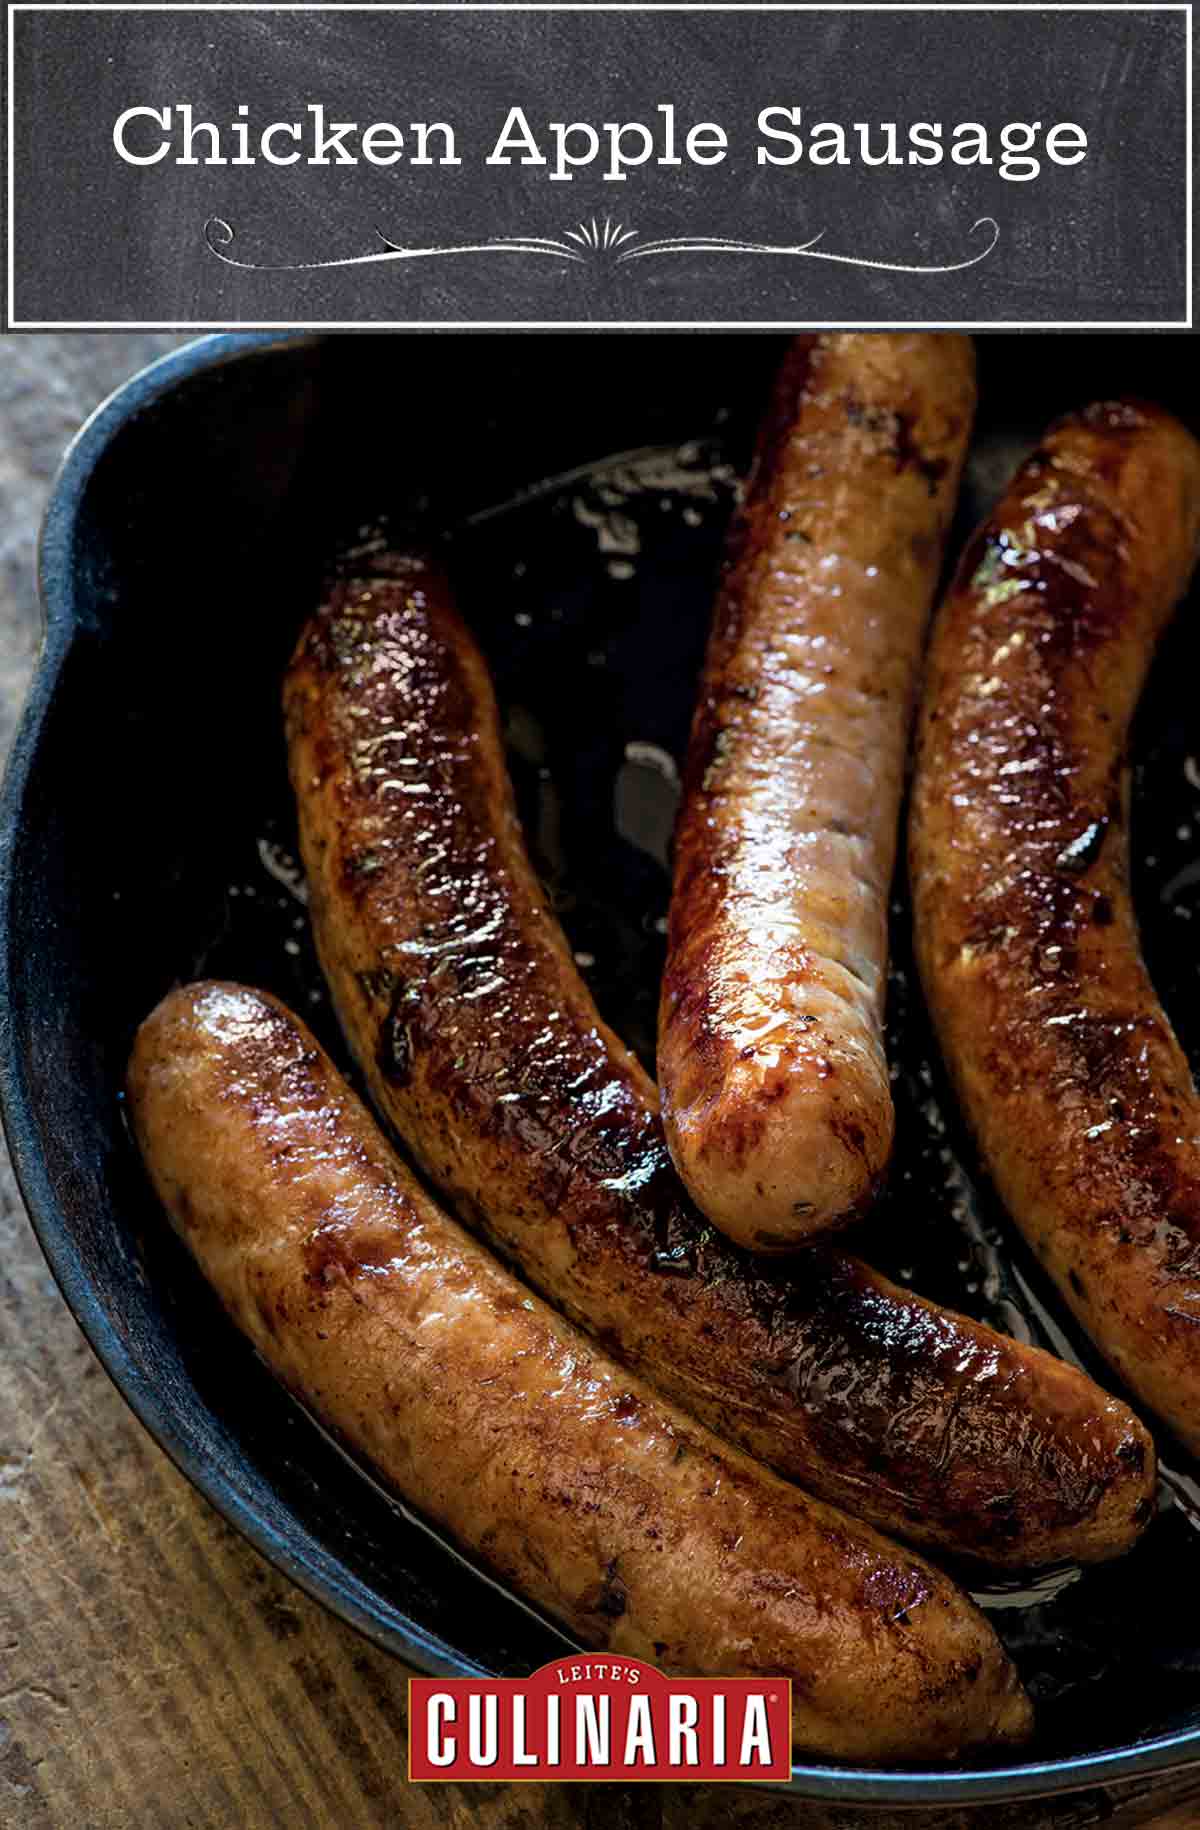 A cast-iron skillet with four cooked chicken apple sausages inside.